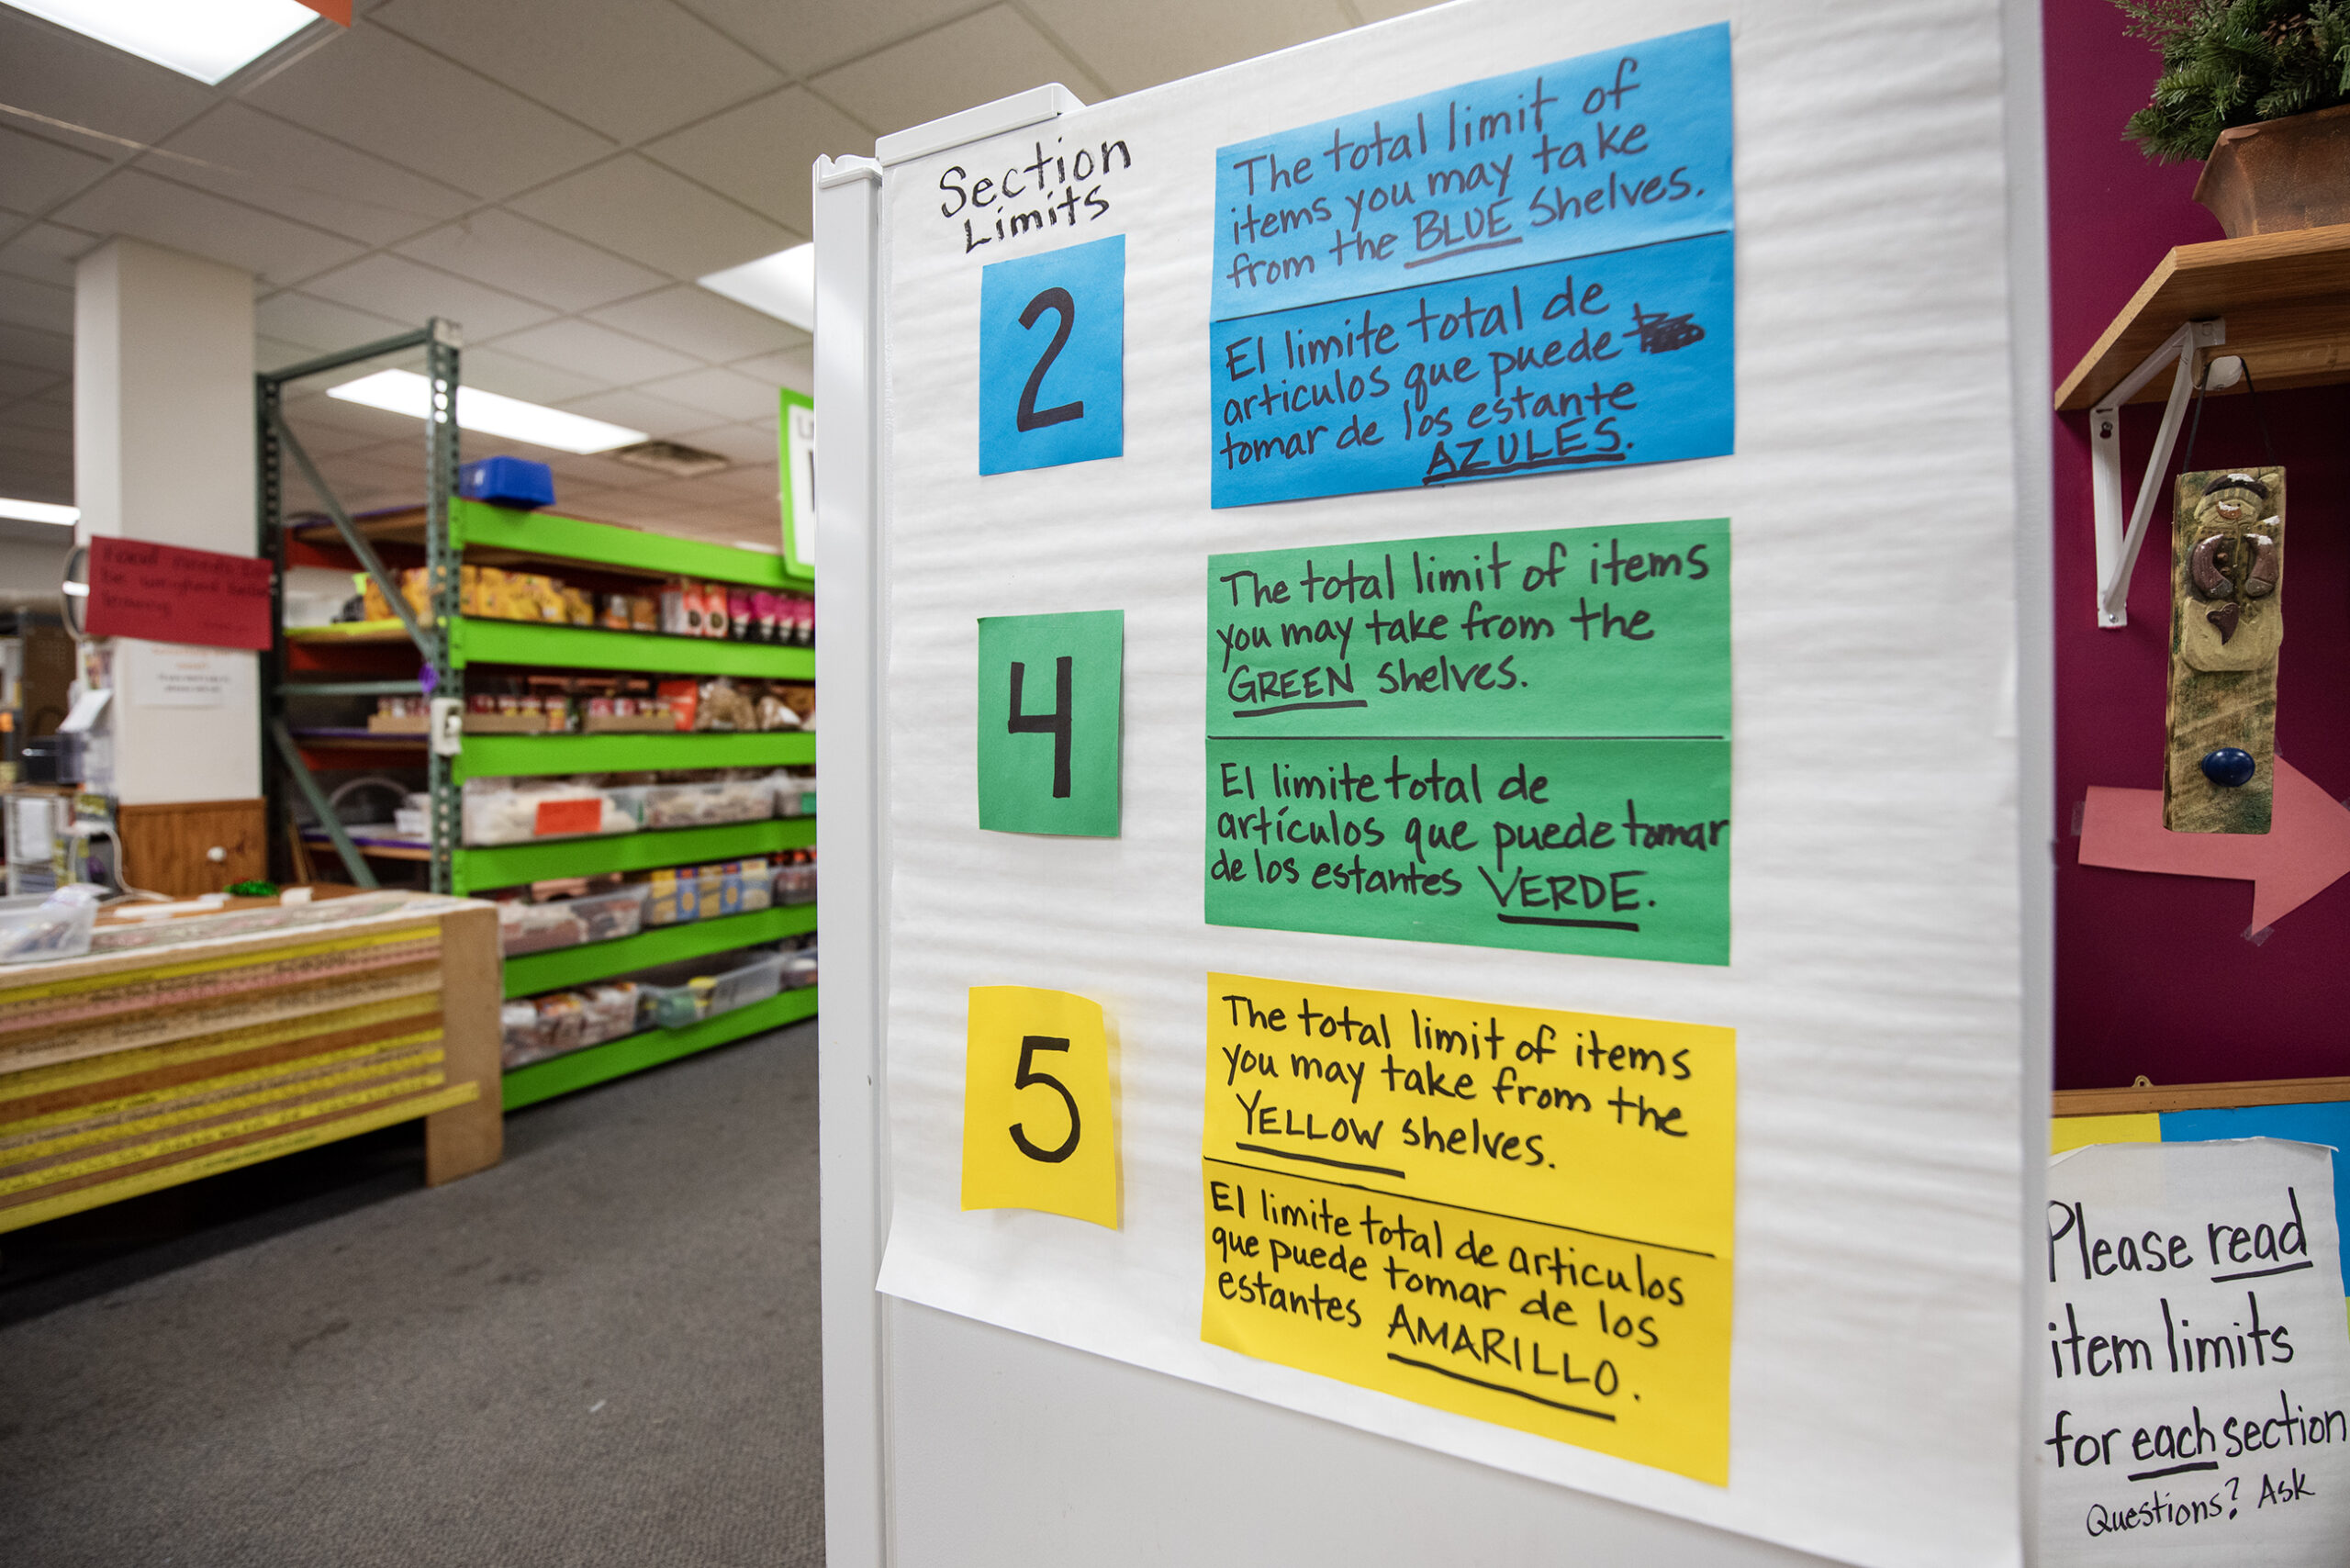 Signs explaining the rules of the food bank are written on colorful strips in English and in Spanish.